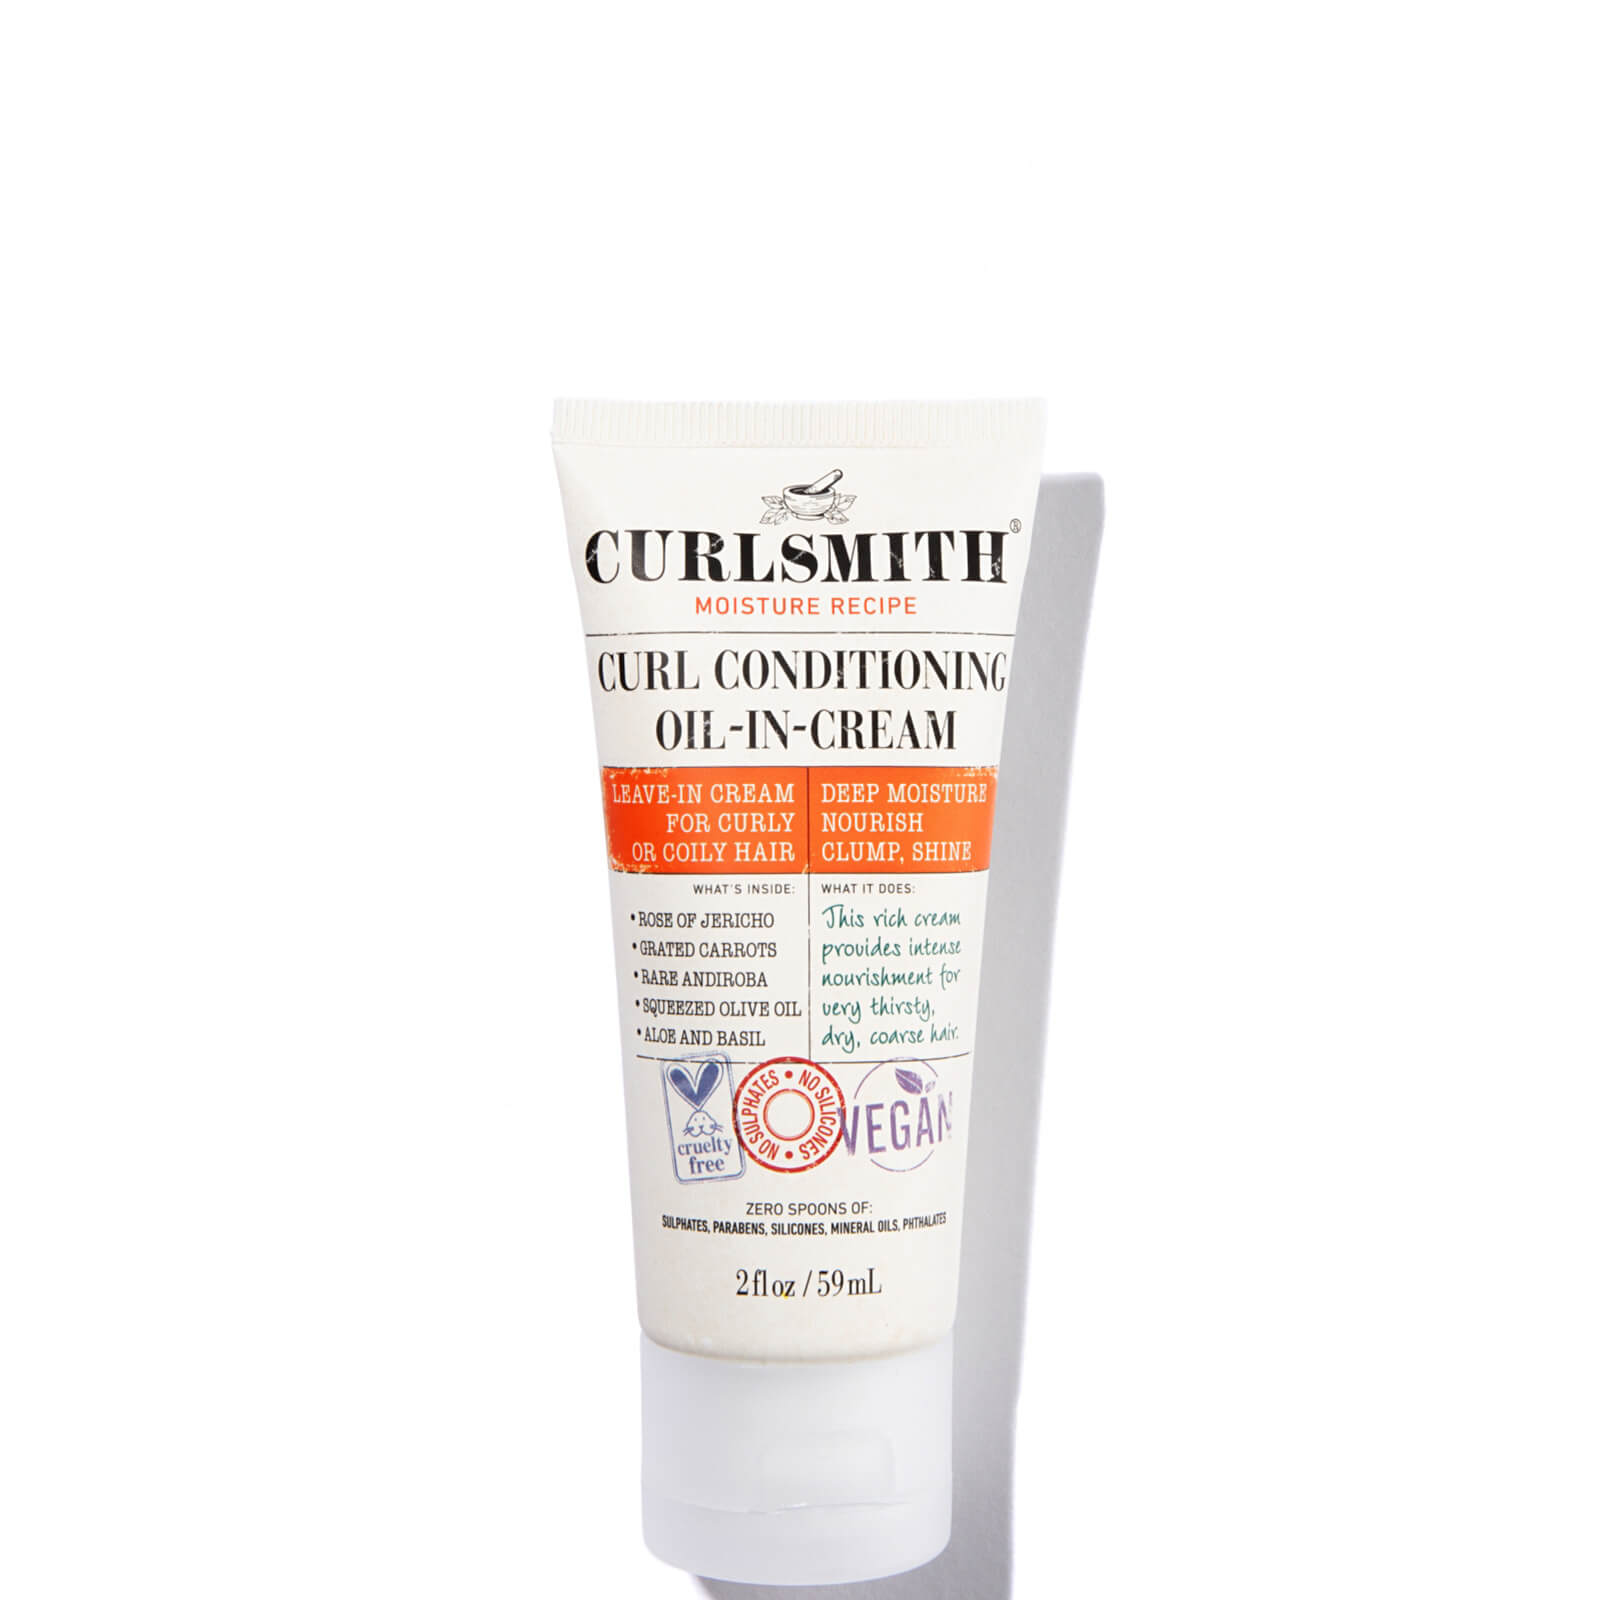 Curlsmith Curl Conditioning Oil-in-cream Travel Size 59ml